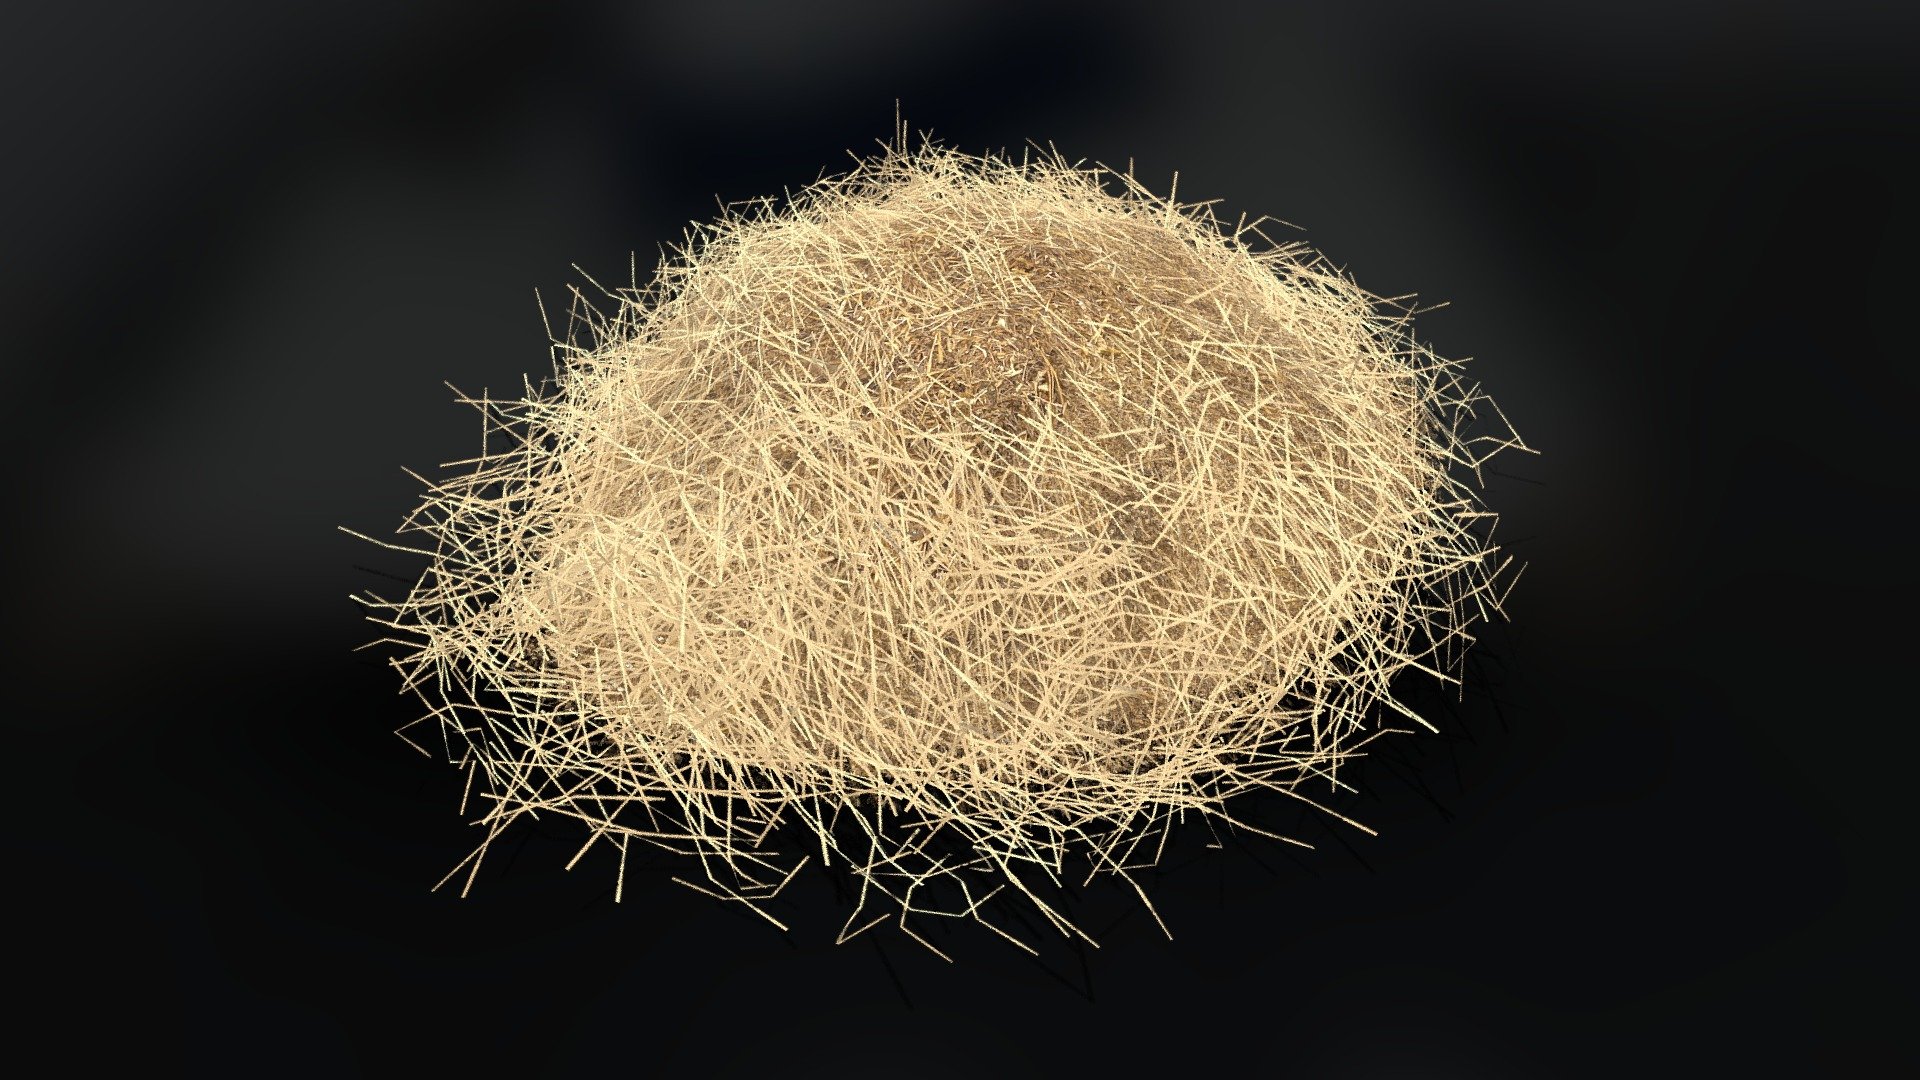 This is a haystack, intended for use in games or any other real-time environment. This model is also included in a larger pack, which contains multiple haystacks and hay bales.

The model is game-ready but relatively high-poly. It is intended to be used with performance-enhancing game engine techniques such as auto LODs, distance culling, etc.

4k .tga textures are included in the download:




BaseColor.tga

Normal.tga

ORM.tga (This is a packed texture, where the RGB channels each contain different texture maps)
Red Channel = Ambient Occlusion - Green Channel = Roughness - Blue Channel = Metallic

Model + Textures by: David Falke

Website: https://www.grip420.com/

Discord: Follow us on Discord

Facebook Follow us on Facebook - Haystack Small - 02 - GameReady - Buy Royalty Free 3D model by GRIP420 3d model